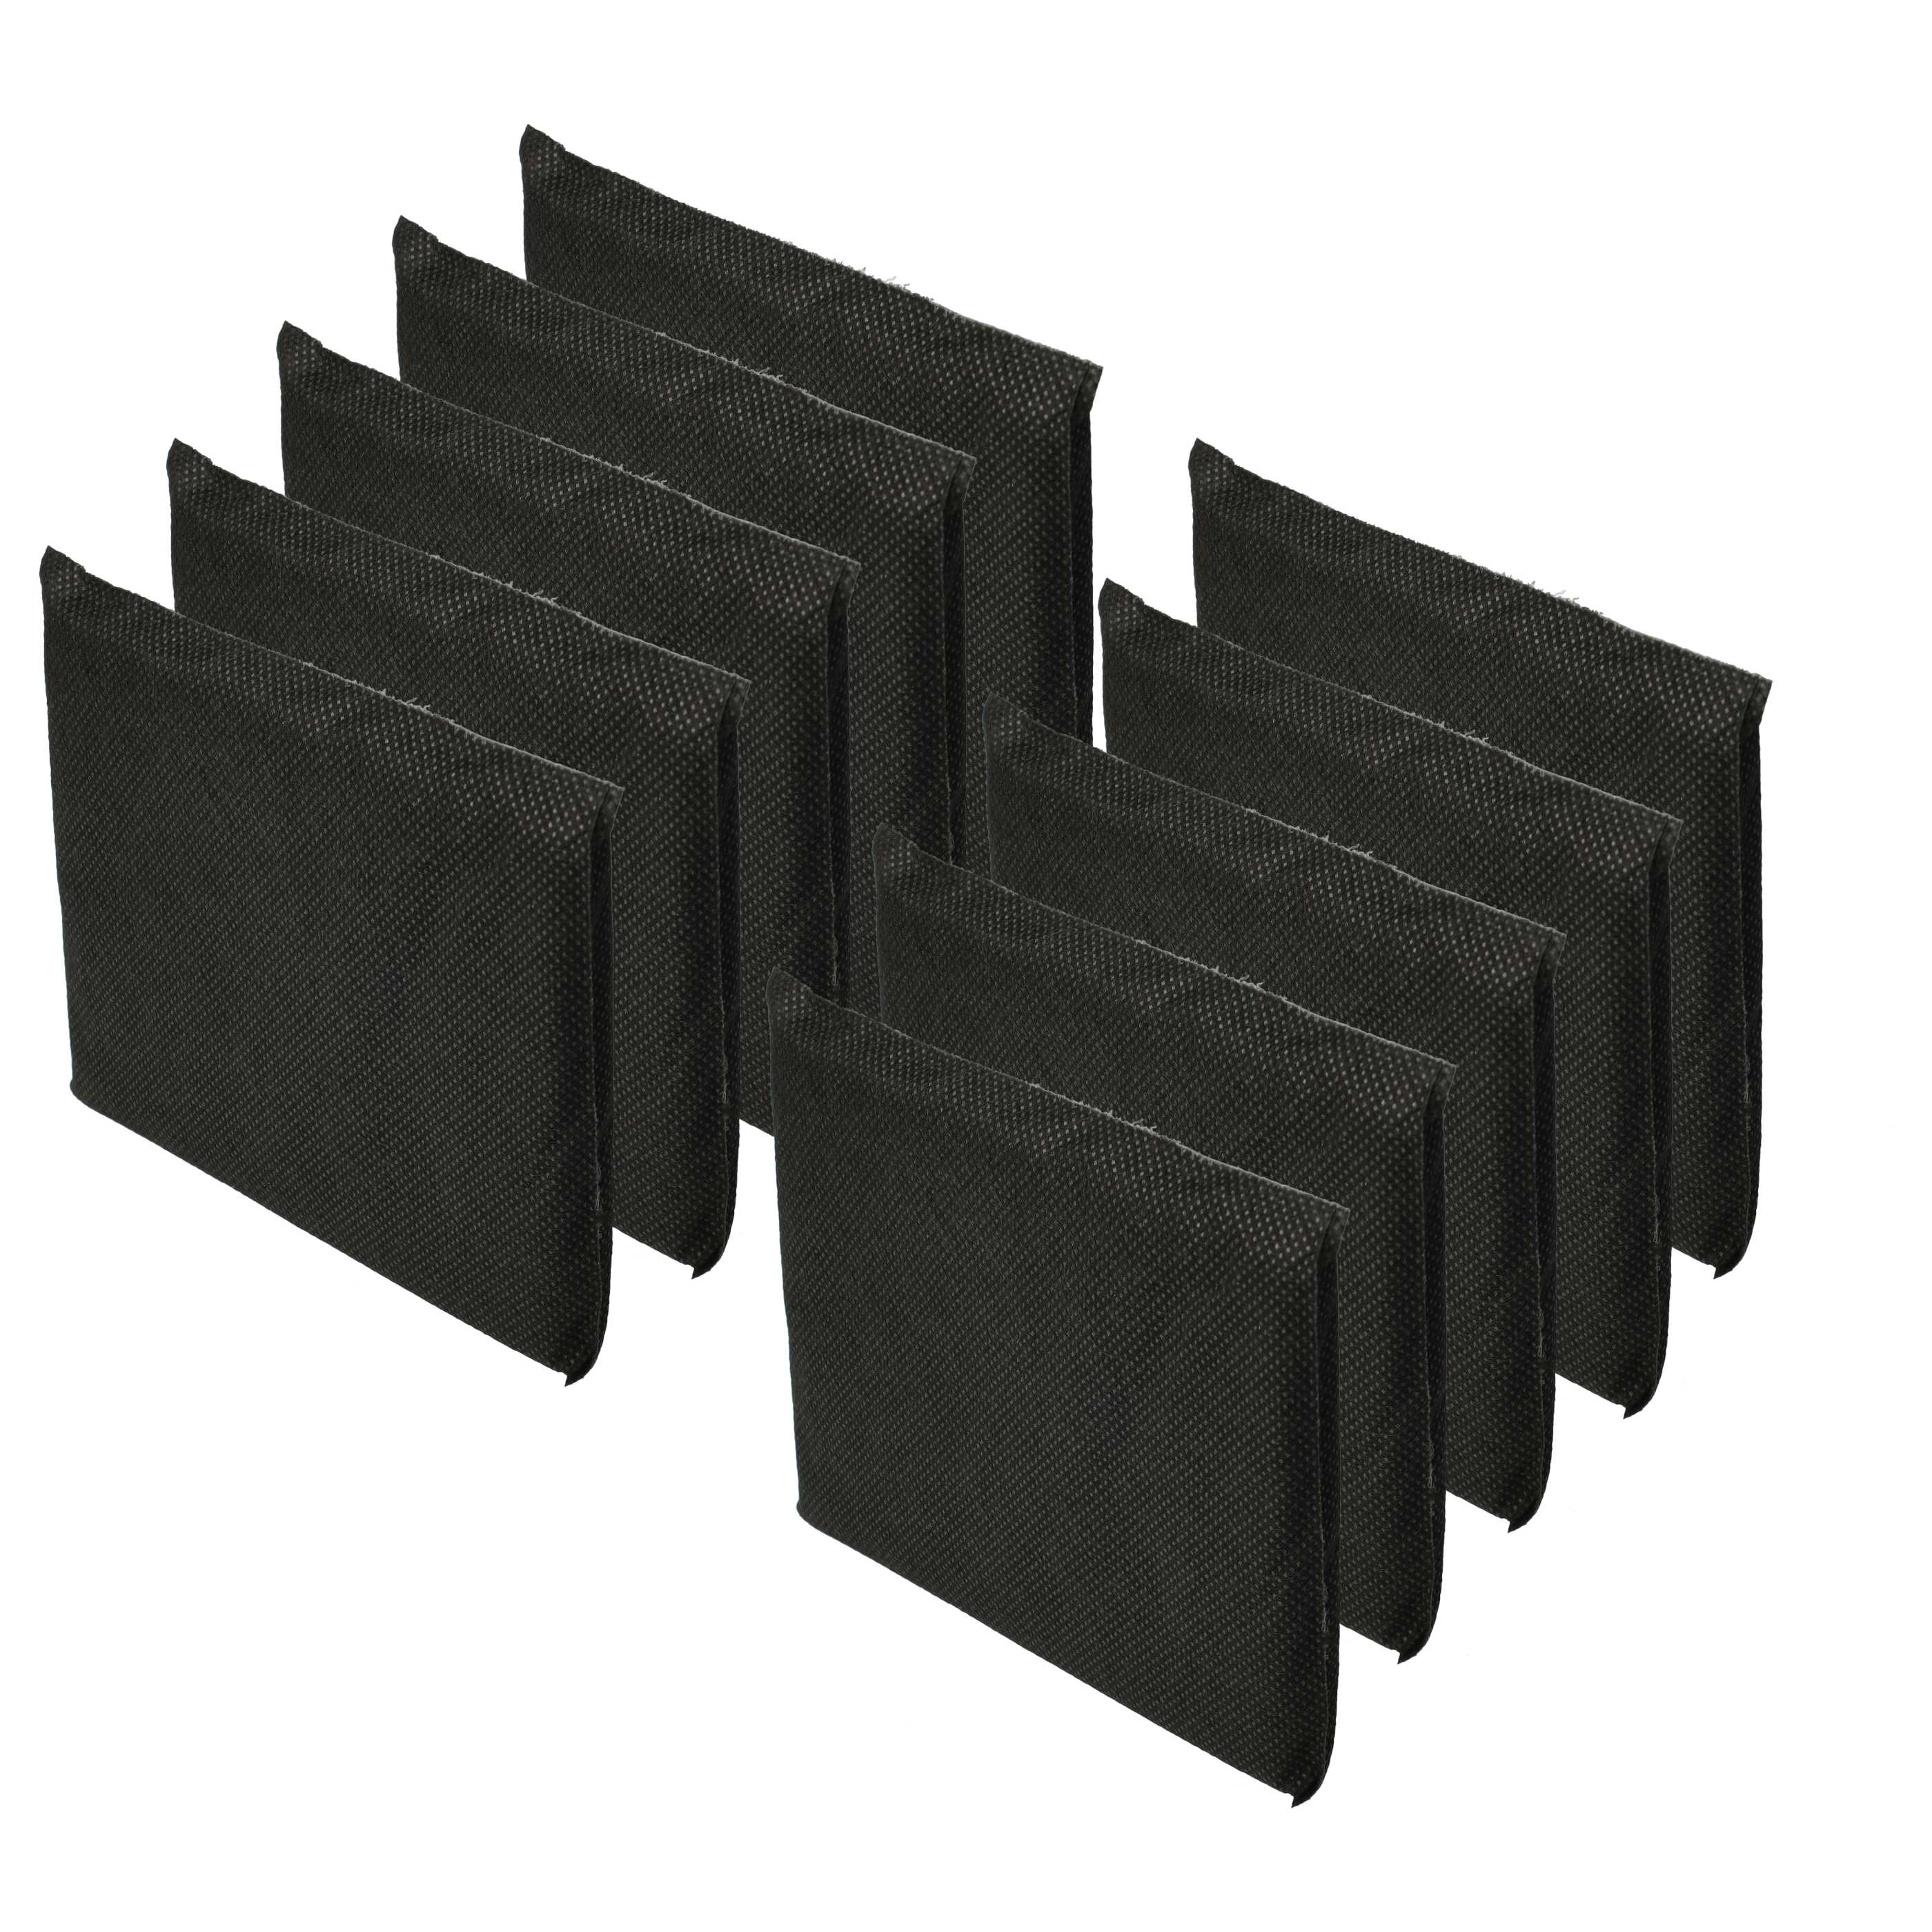 10x Activated Carbon Filter replaces AEG/Electrolux 2081625036, 2081625010 for Juno Refrigerator etc.